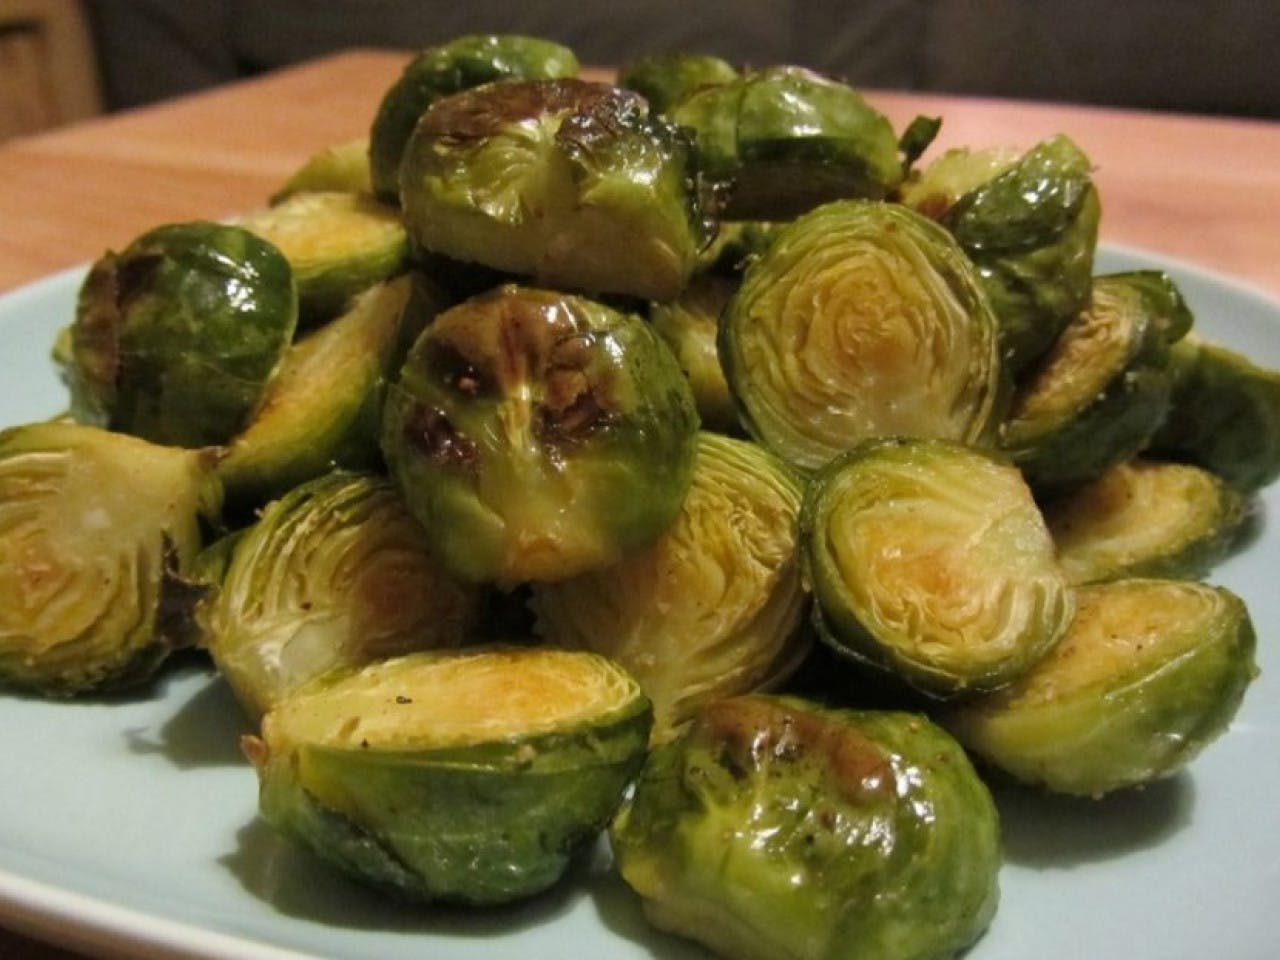 Roasted Brussels sprouts with garlic